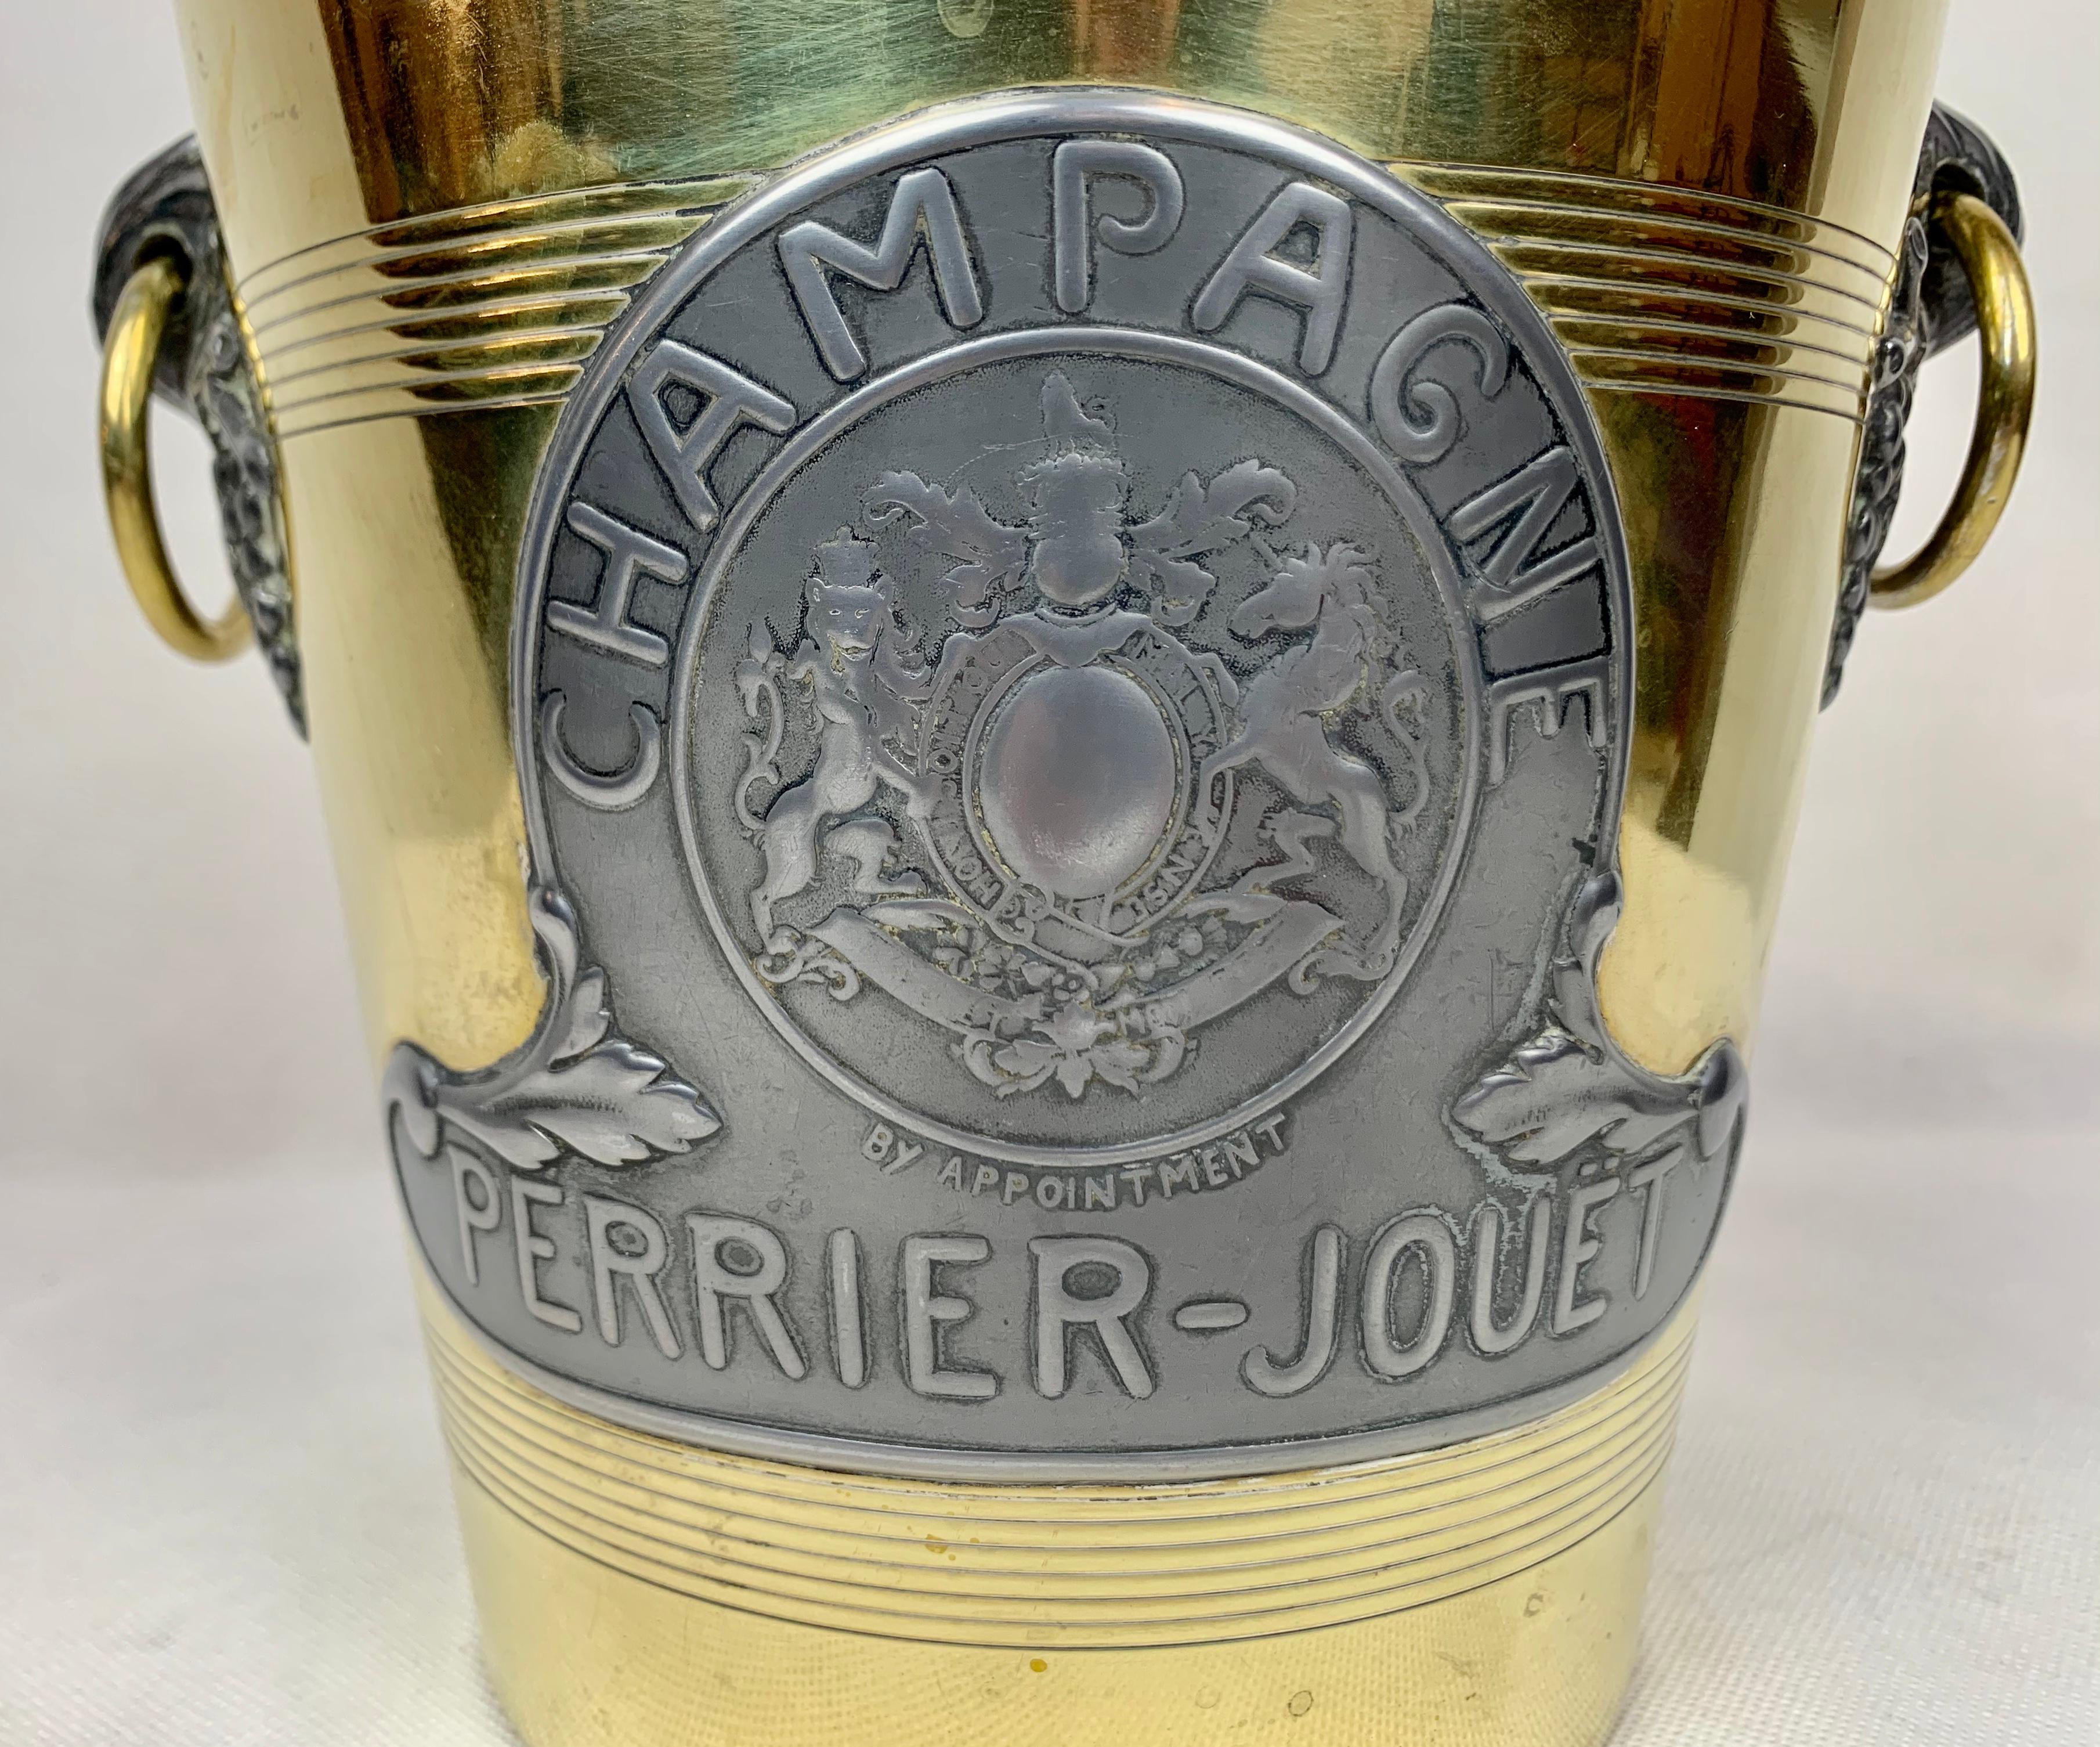 This antique Perrier-Jouet brass and pewter champagne cooler was made early in the twentieth century by Argit in Paris (makers mark on the bottom). The front has in pewter 